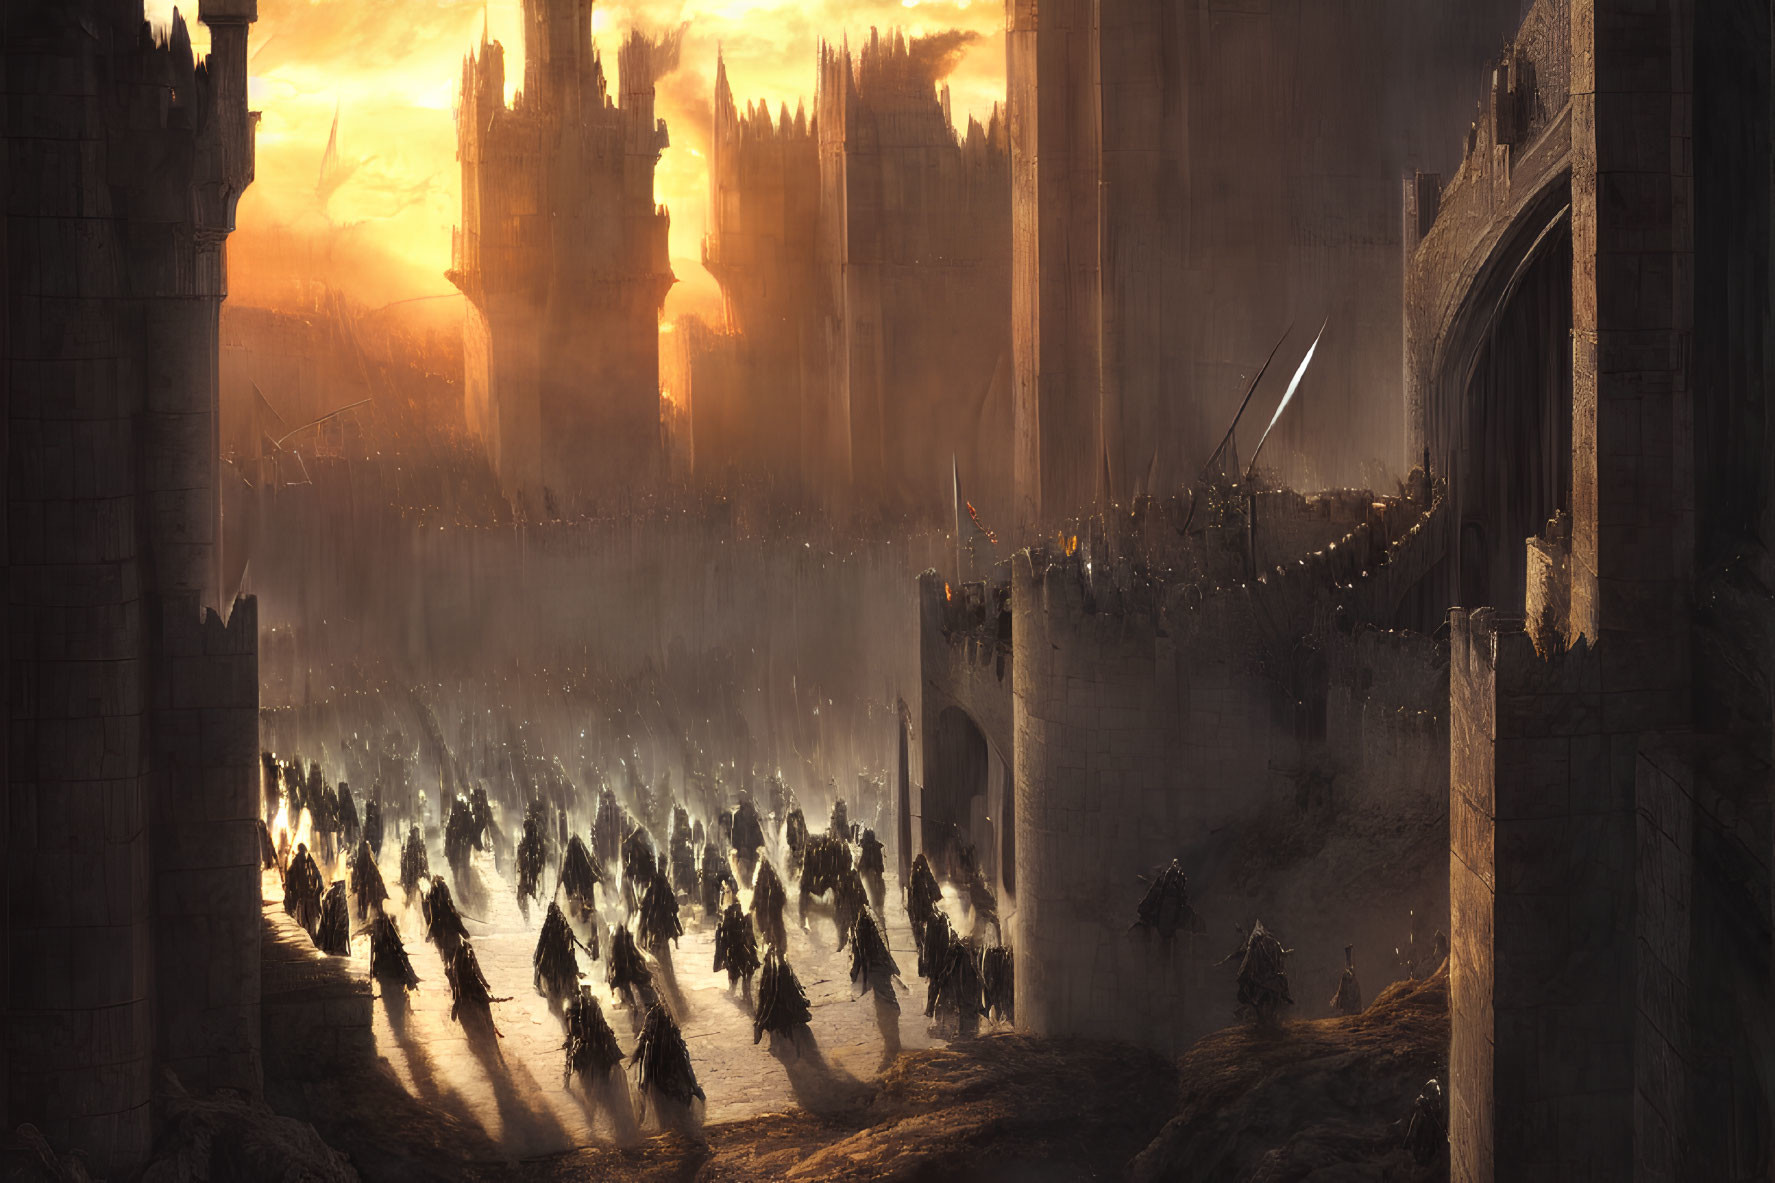 Massive army marching towards grand castle at sunset